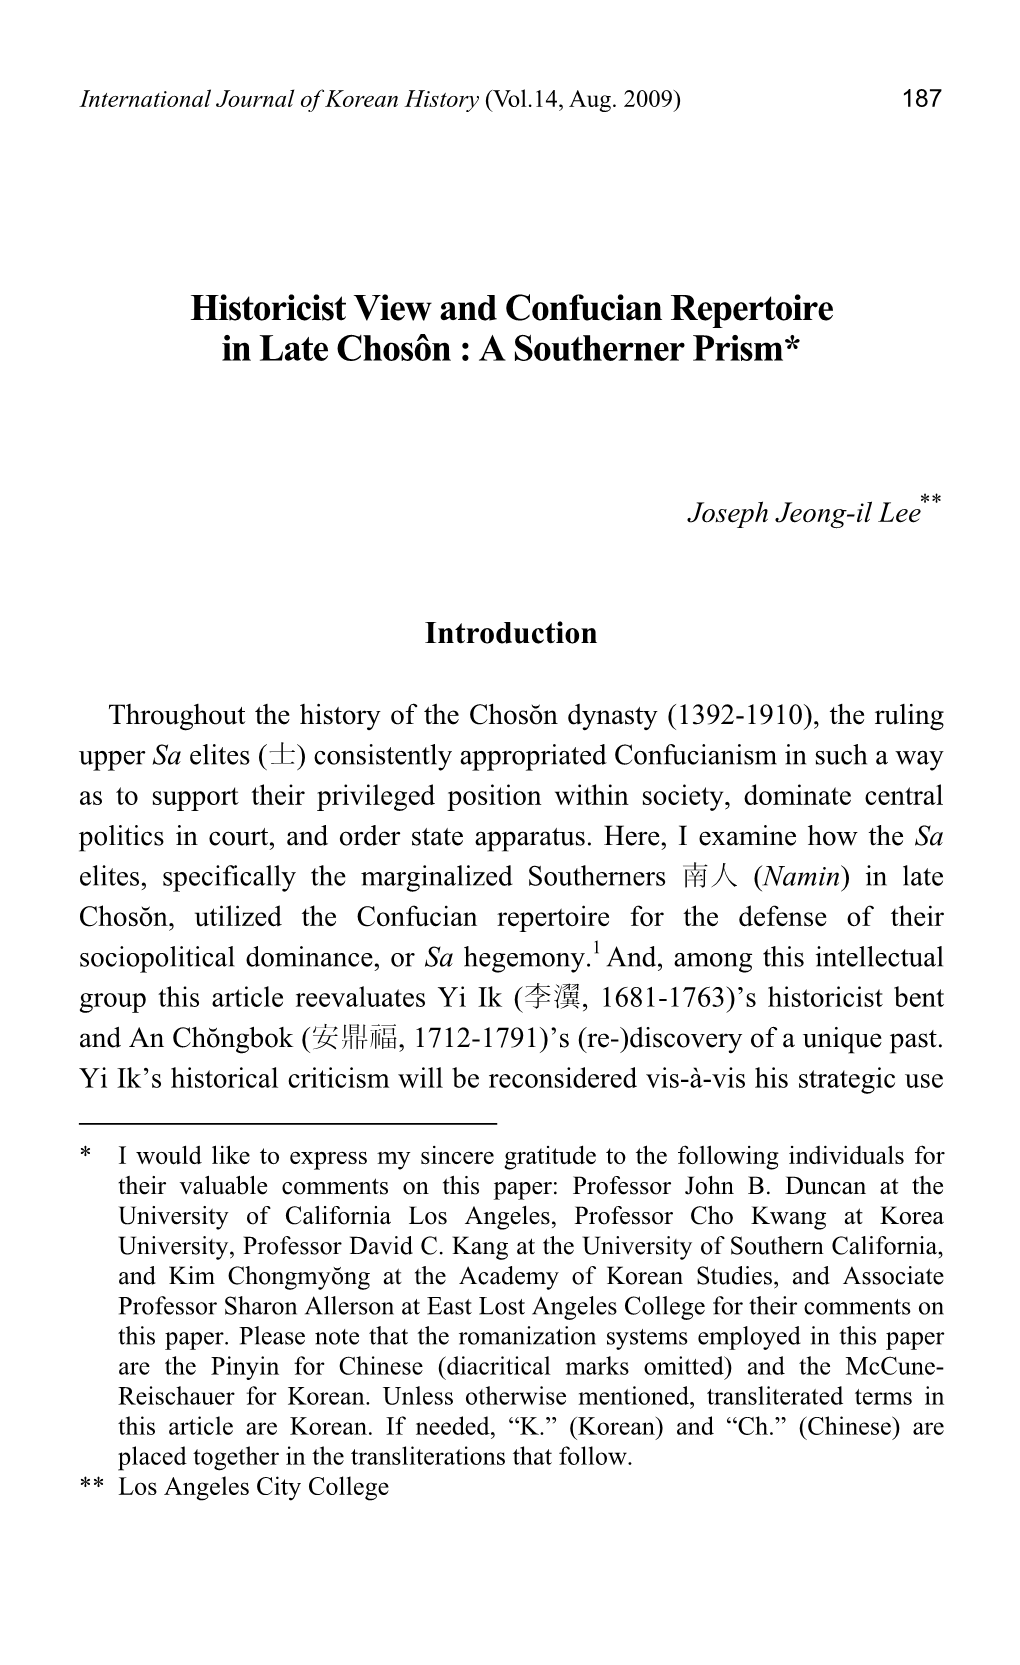 Historicist View and Confucian Repertoire in Late Chosôn : a Southerner Prism*